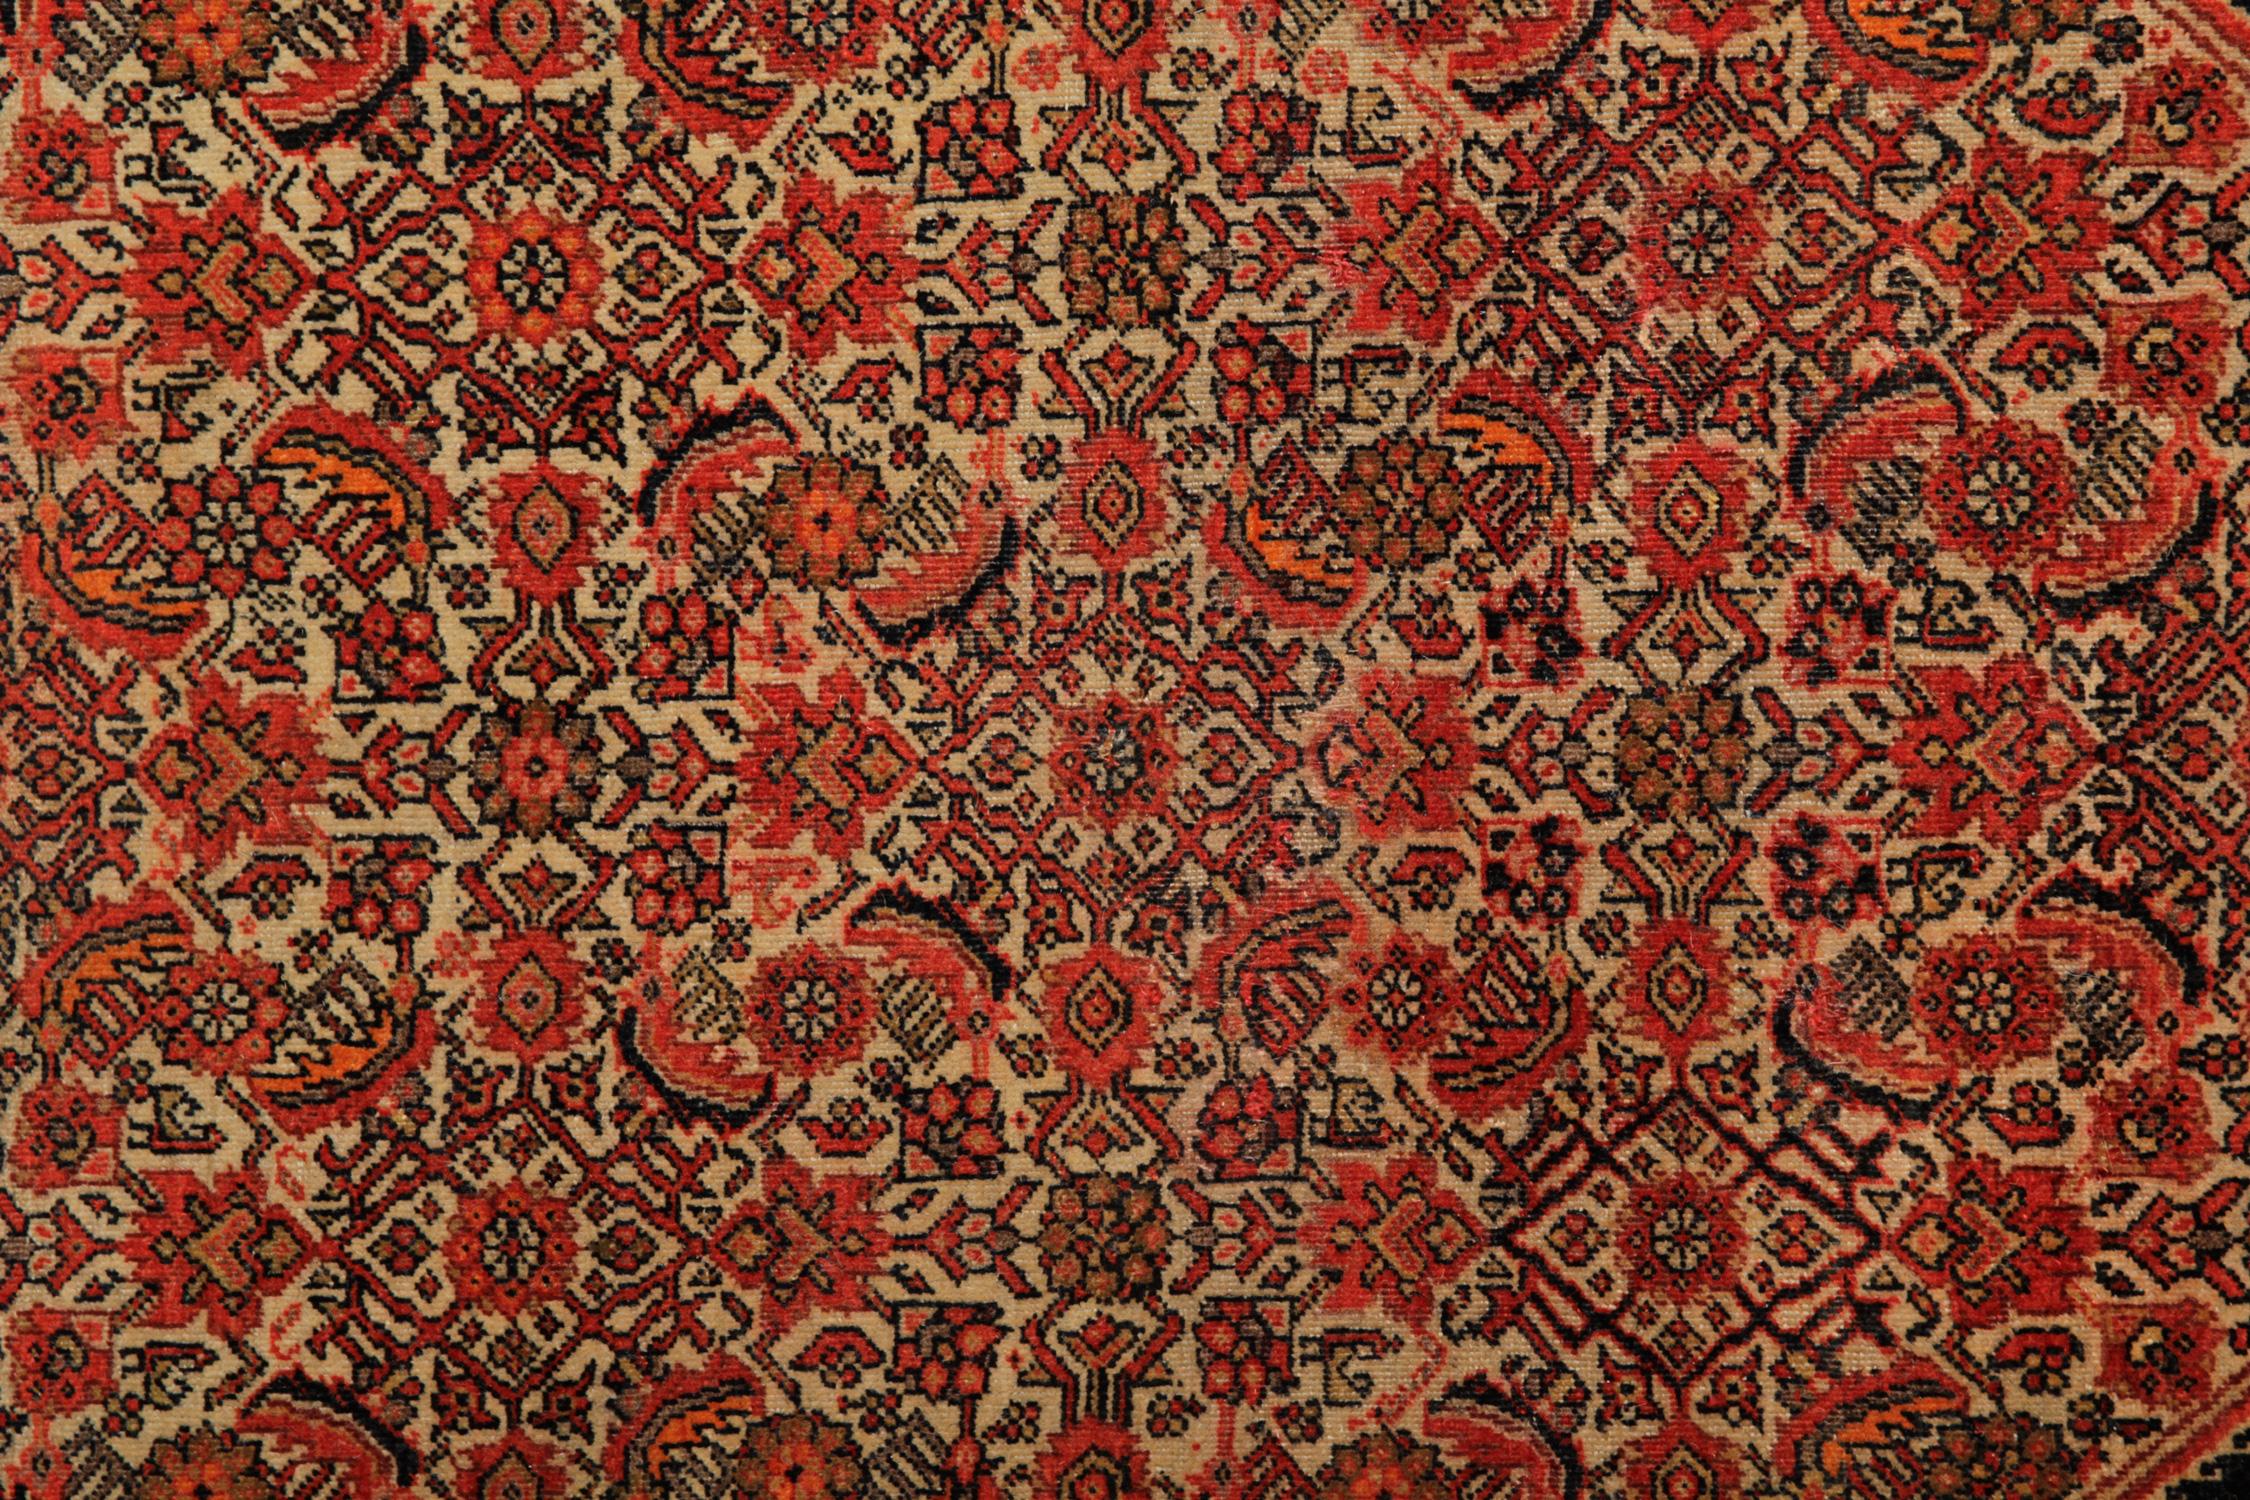 This Antique Carpet Rug features a unique all-over design that has a bold black line that outlines a trio of diamonds in the centre. The background is cream with orange, brown, rust and red accents that make up the intricate design. Both the colour